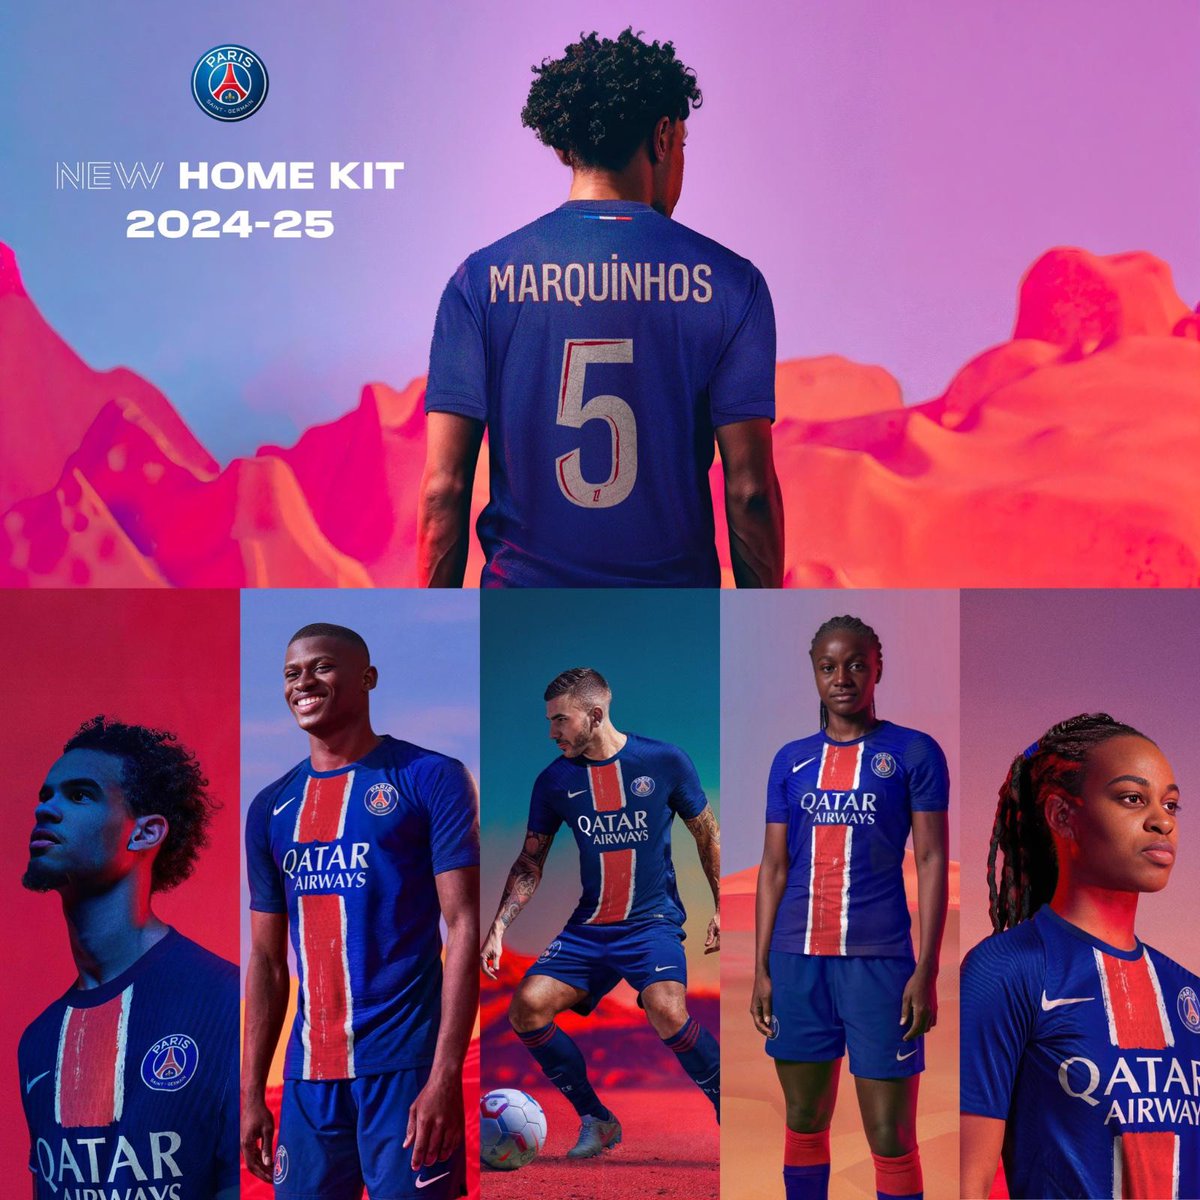 Mbappe Excluded in PSG's Next Season Jersey Launch 👀